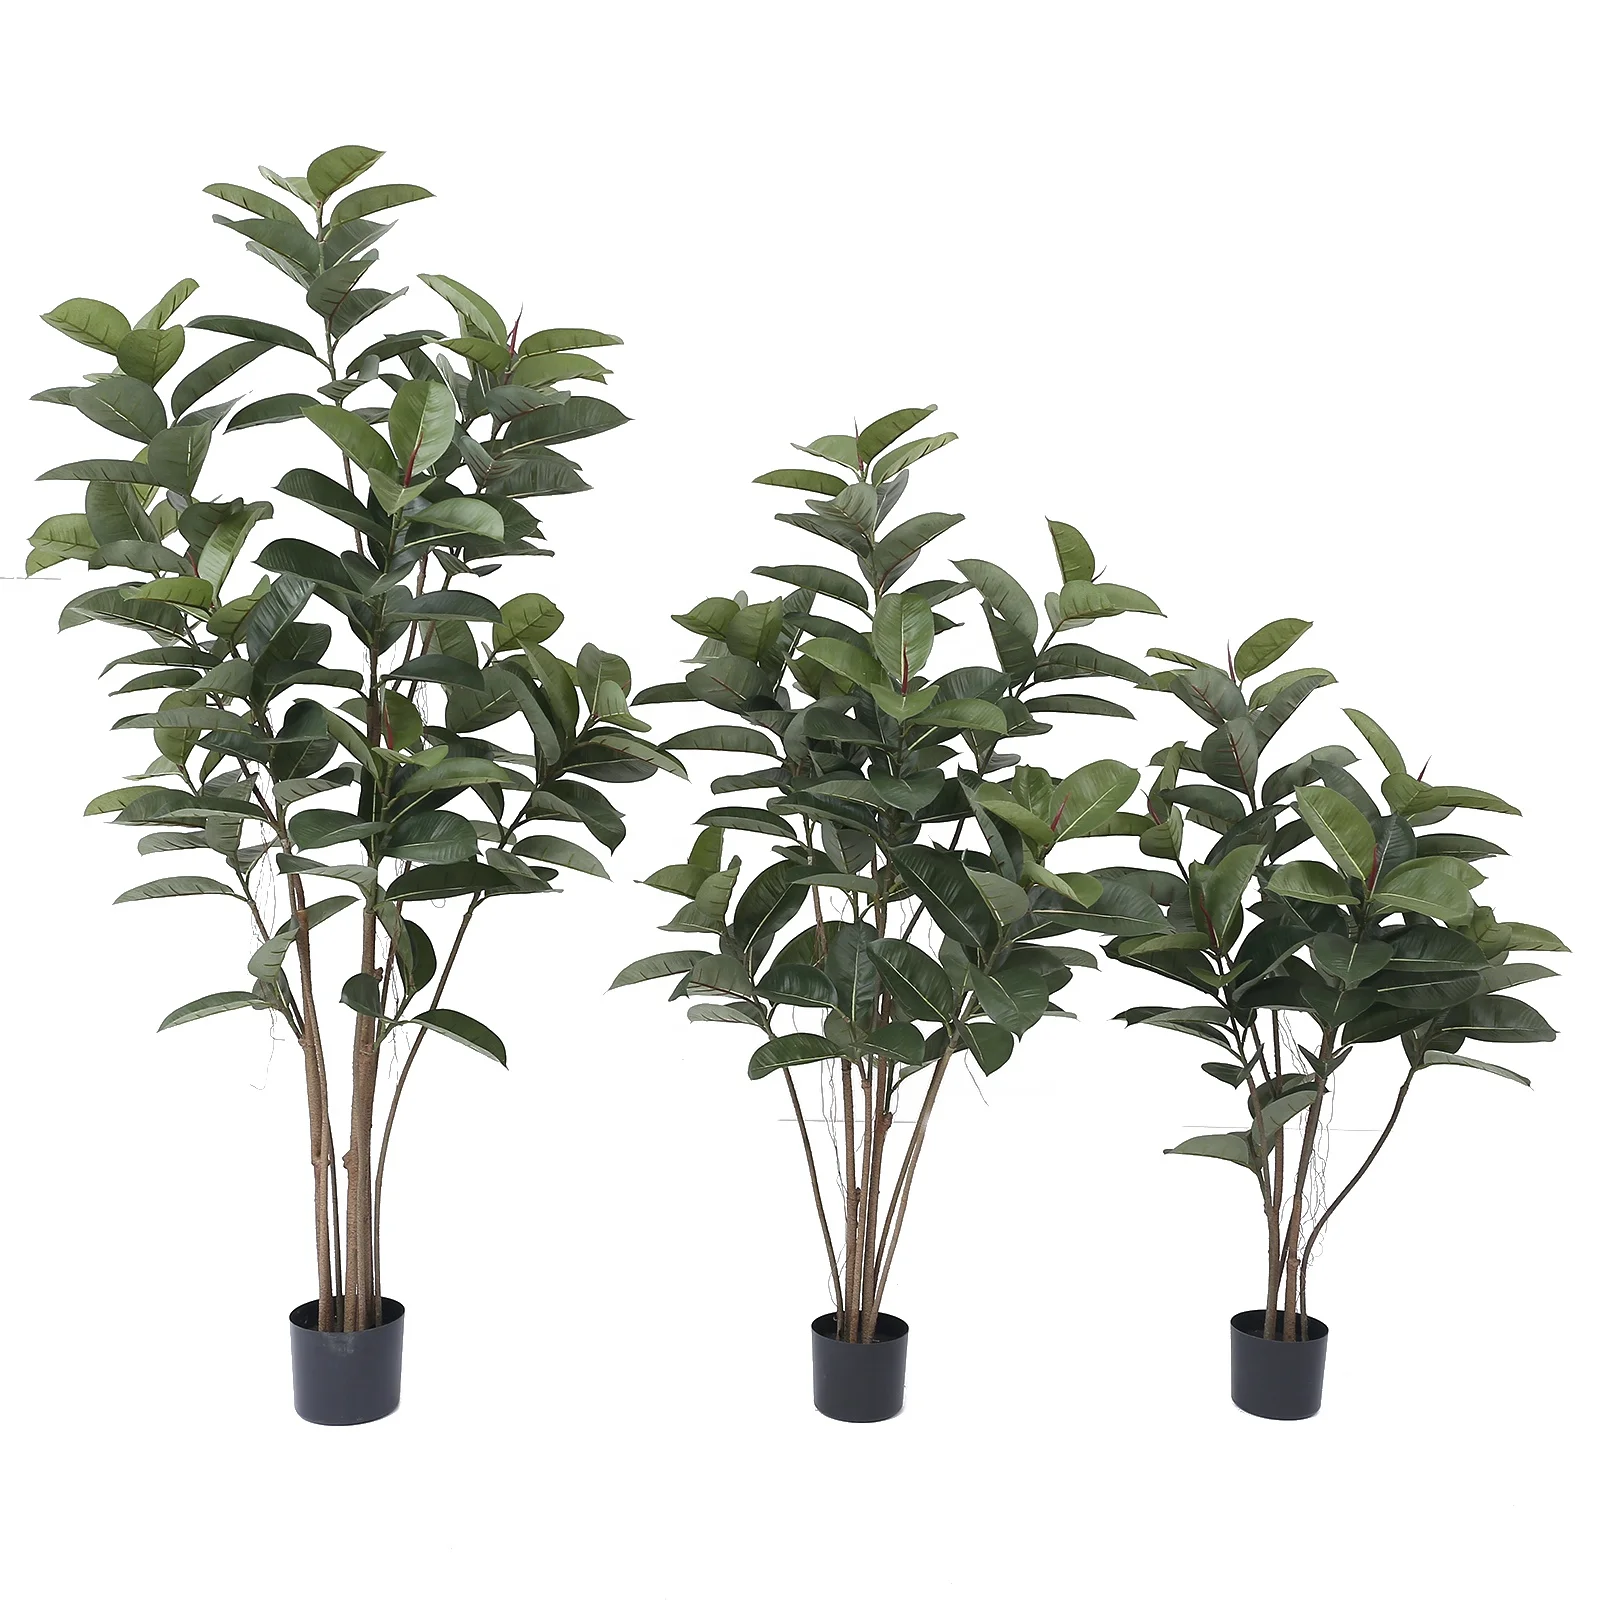 

Faux Tropical Ficus Elastica Plant 150cm Artificial Potted Rubber Tree for Home Office Decor, Shown